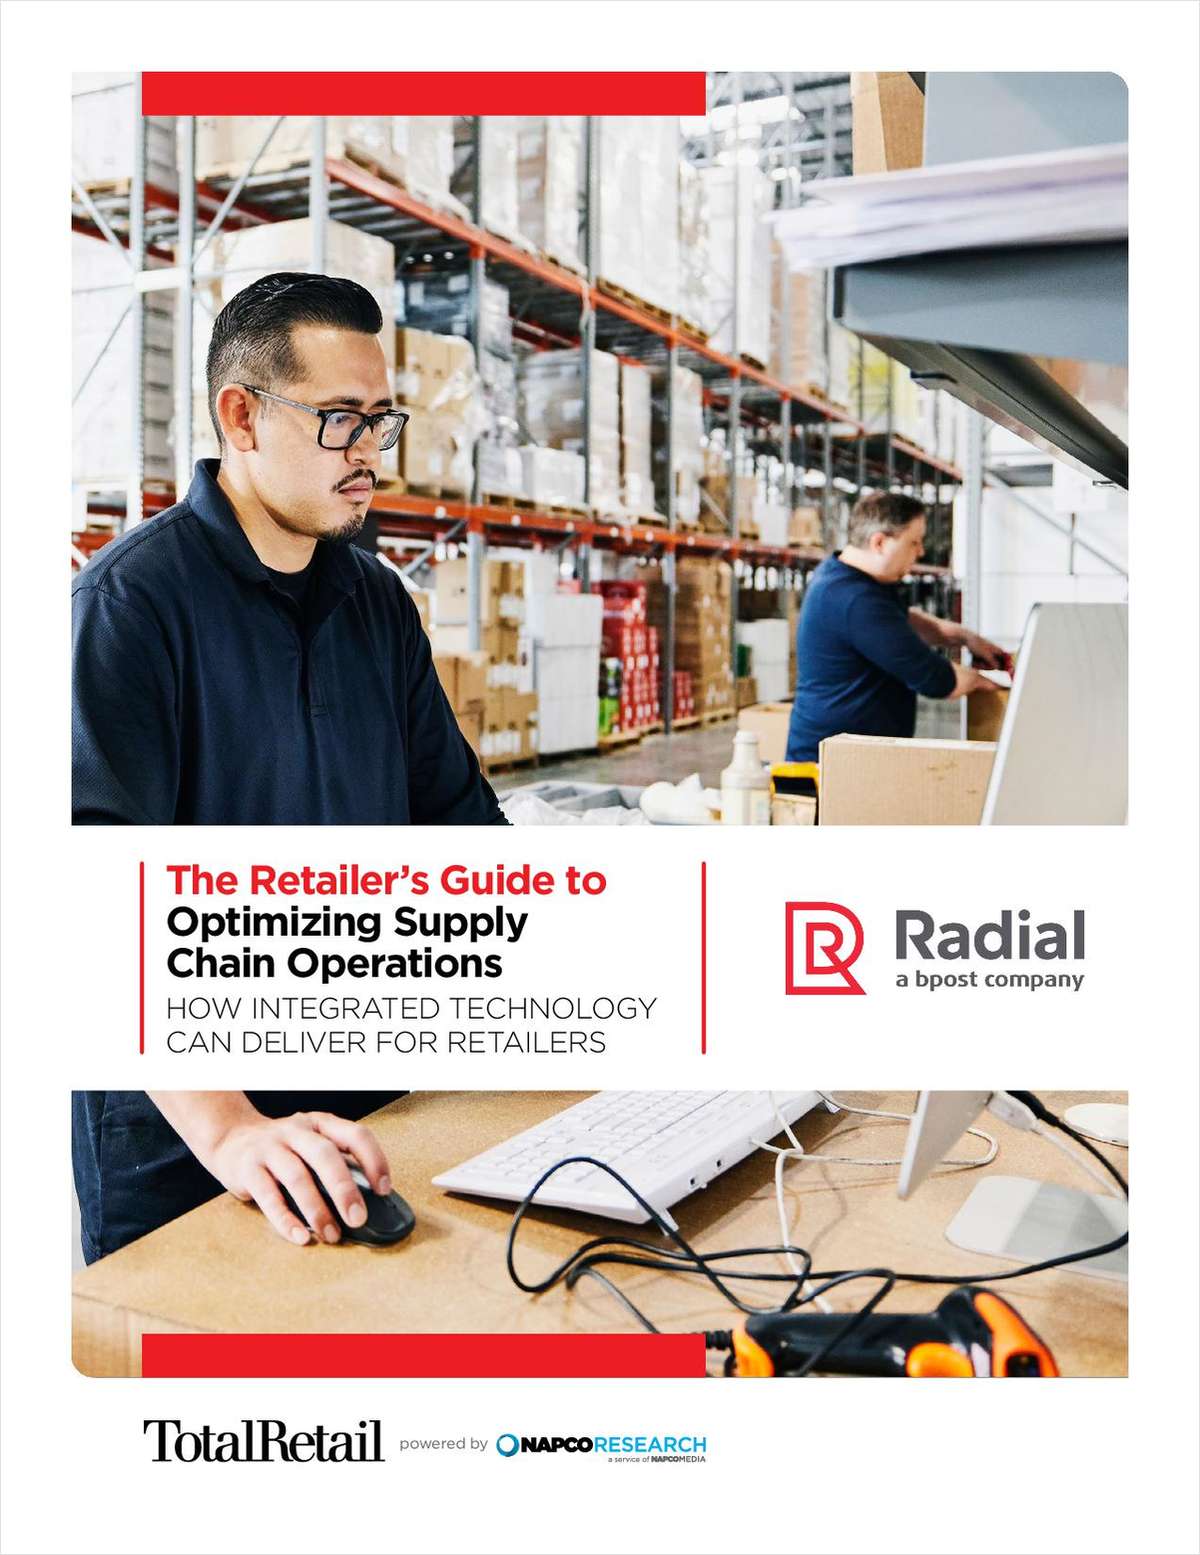 The Retailer's Guide to Optimizing Supply Chain Operations